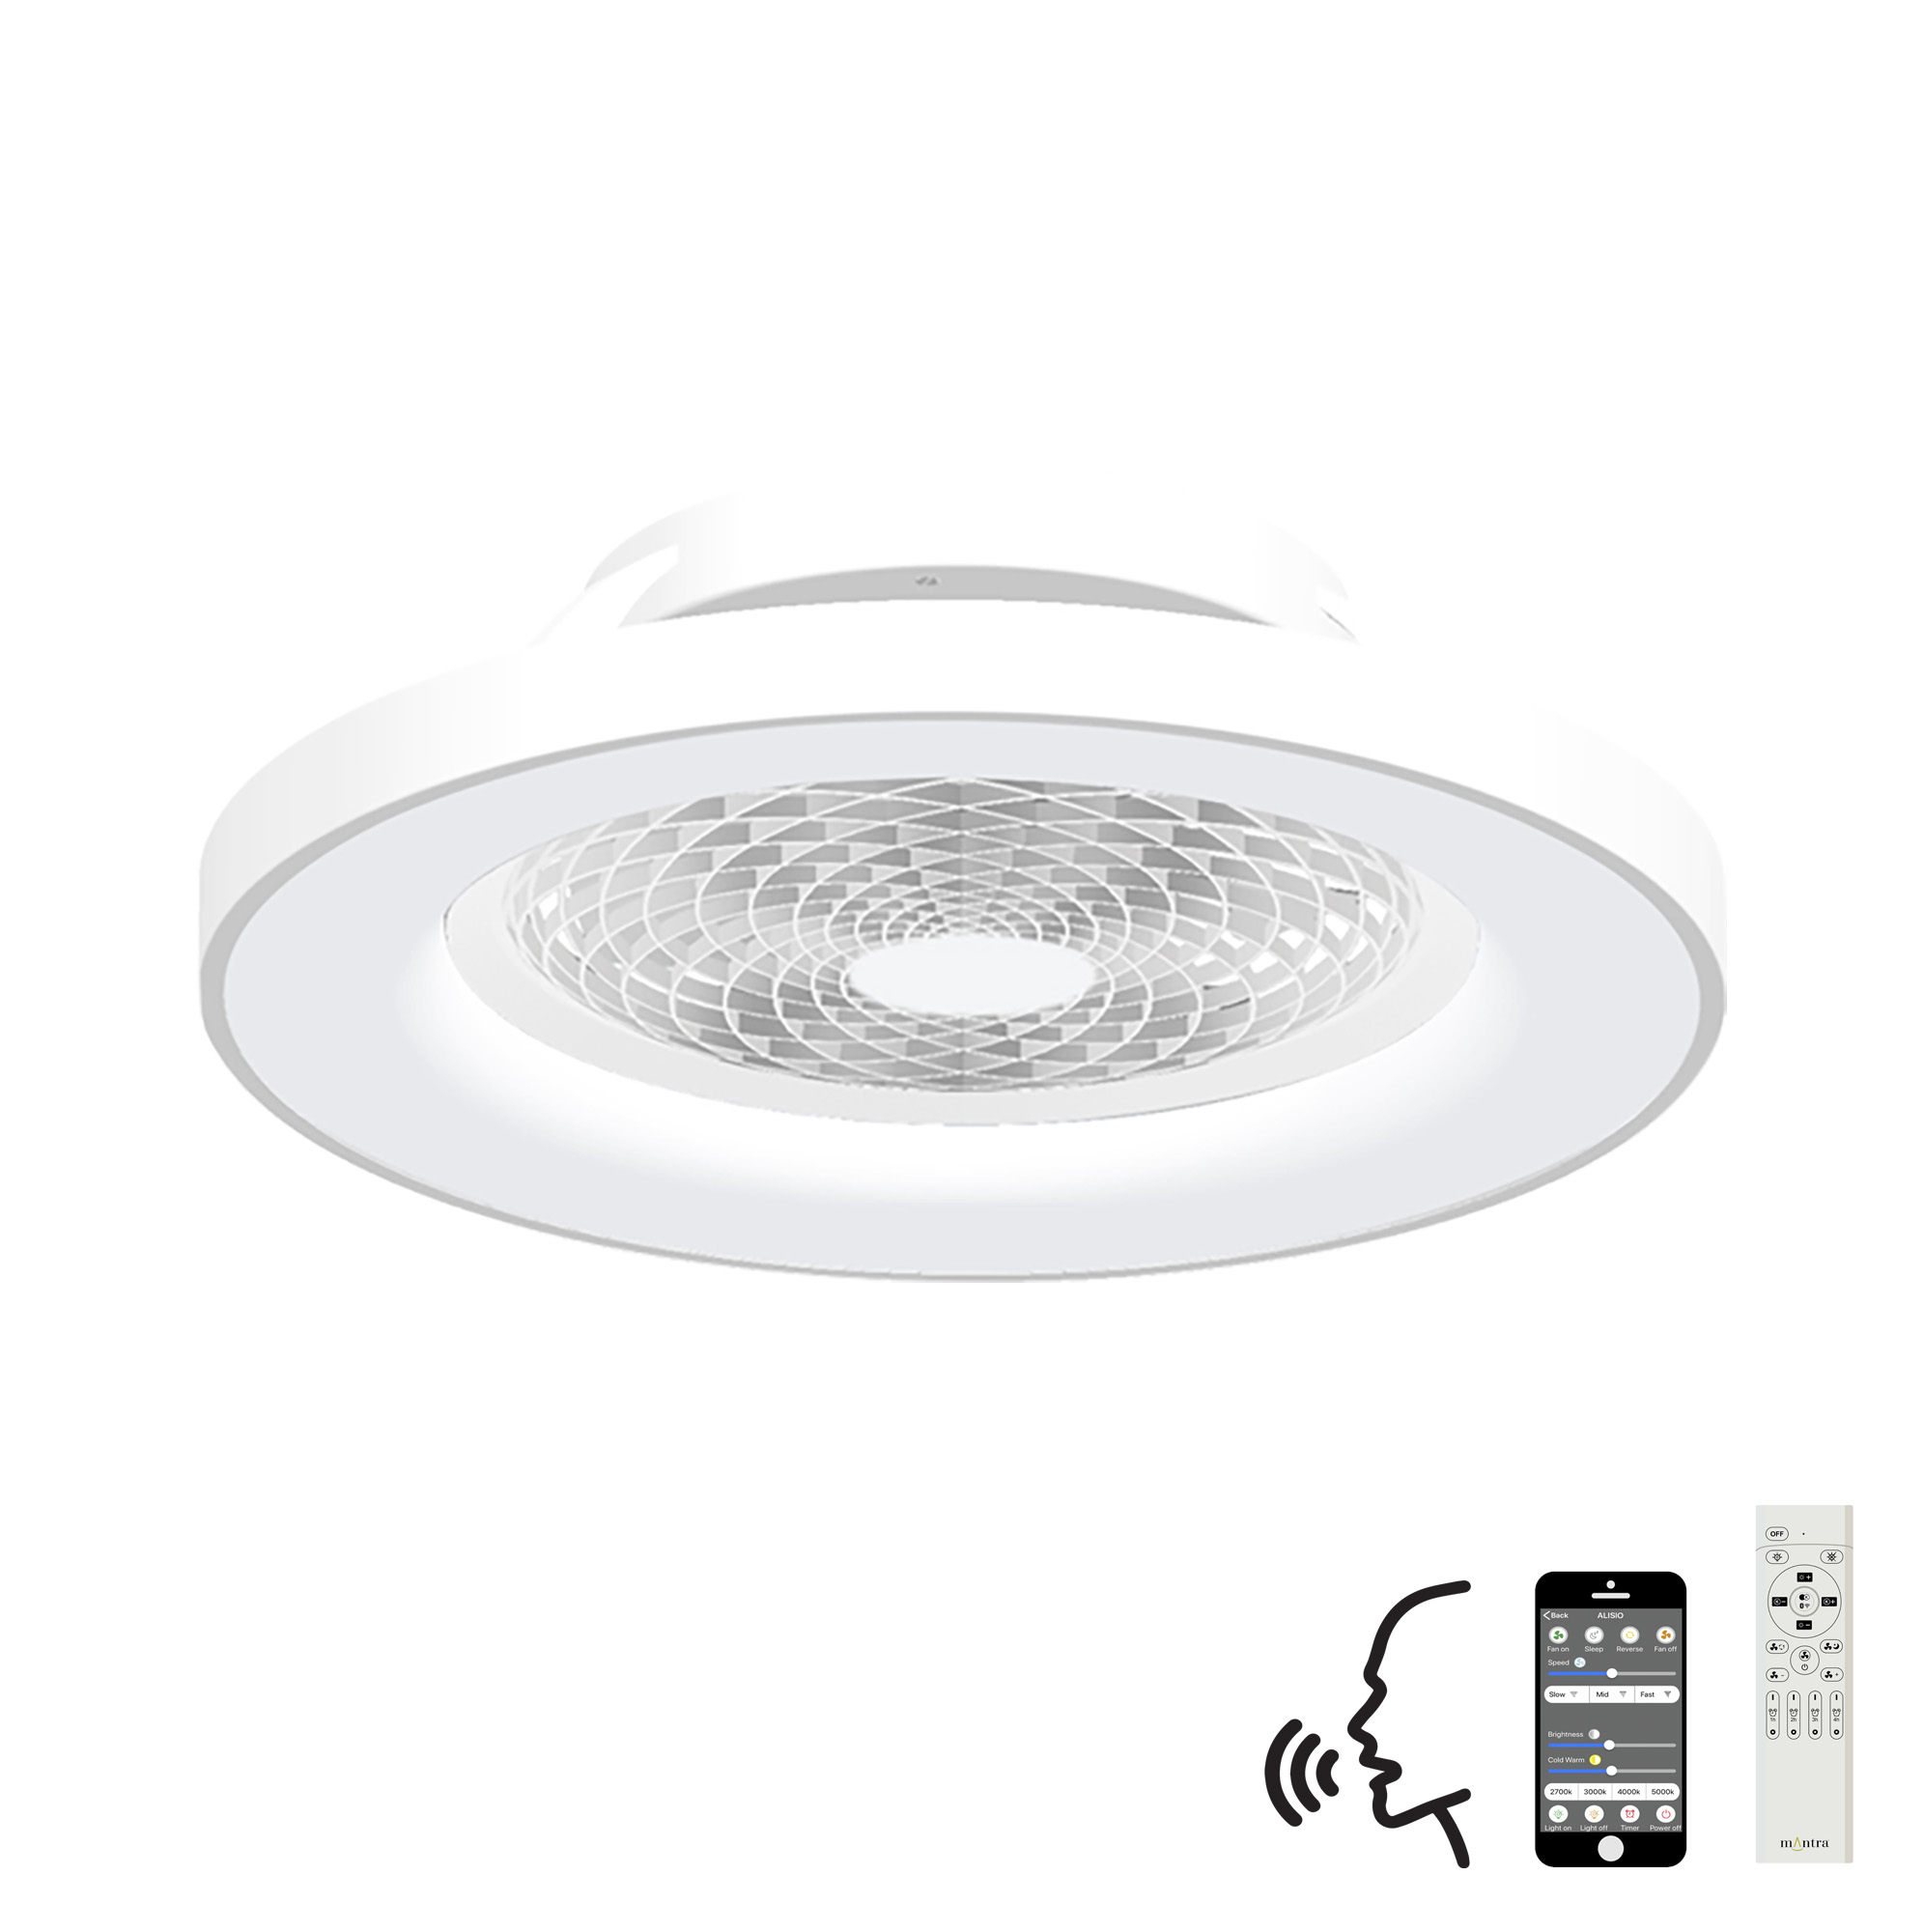 M7123  Tibet 70W LED Dimmable Ceiling Light & Fan, Remote / APP / Voice Controlled White